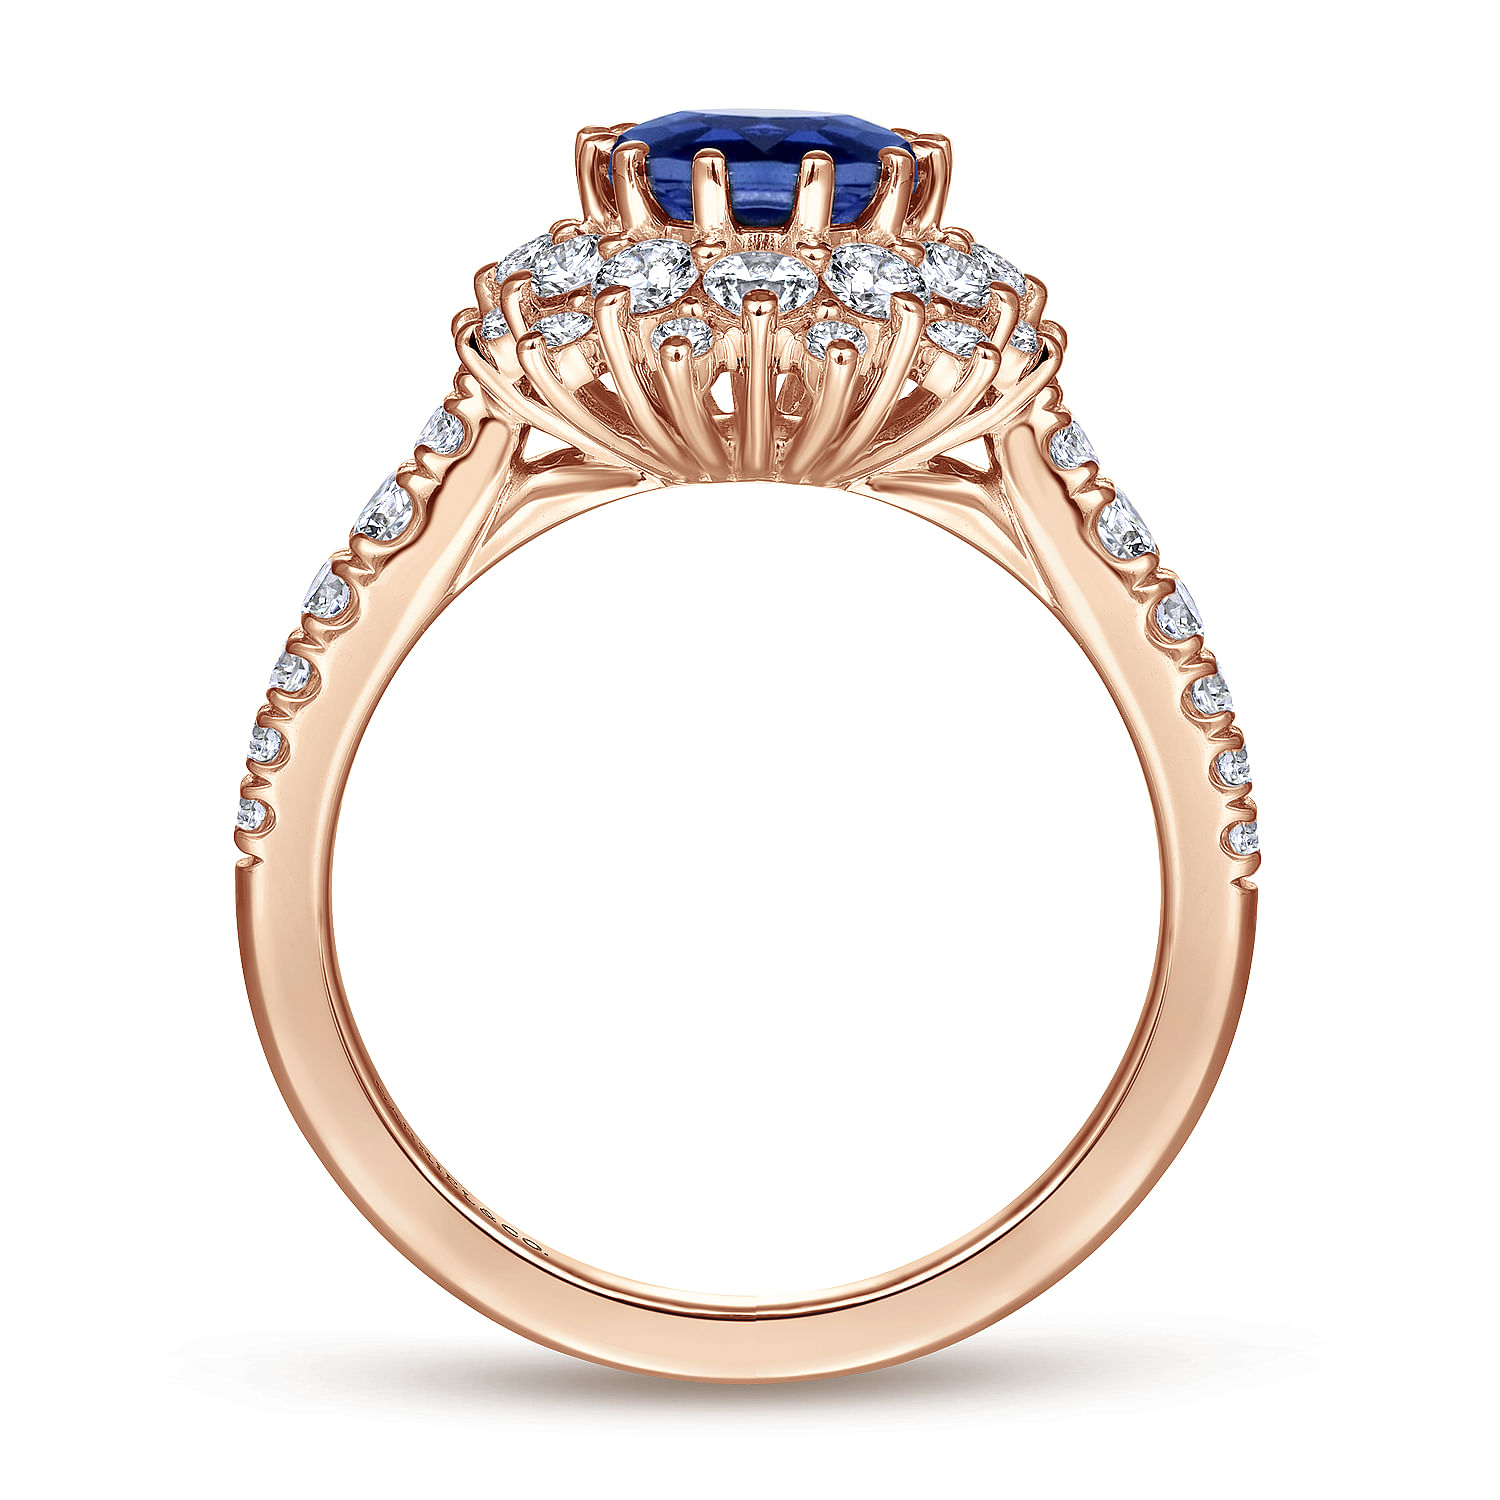 Imani - 14K Rose Gold Oval Halo Diamond and Sapphire Engagement Ring - 0.83 ct - Shot 2